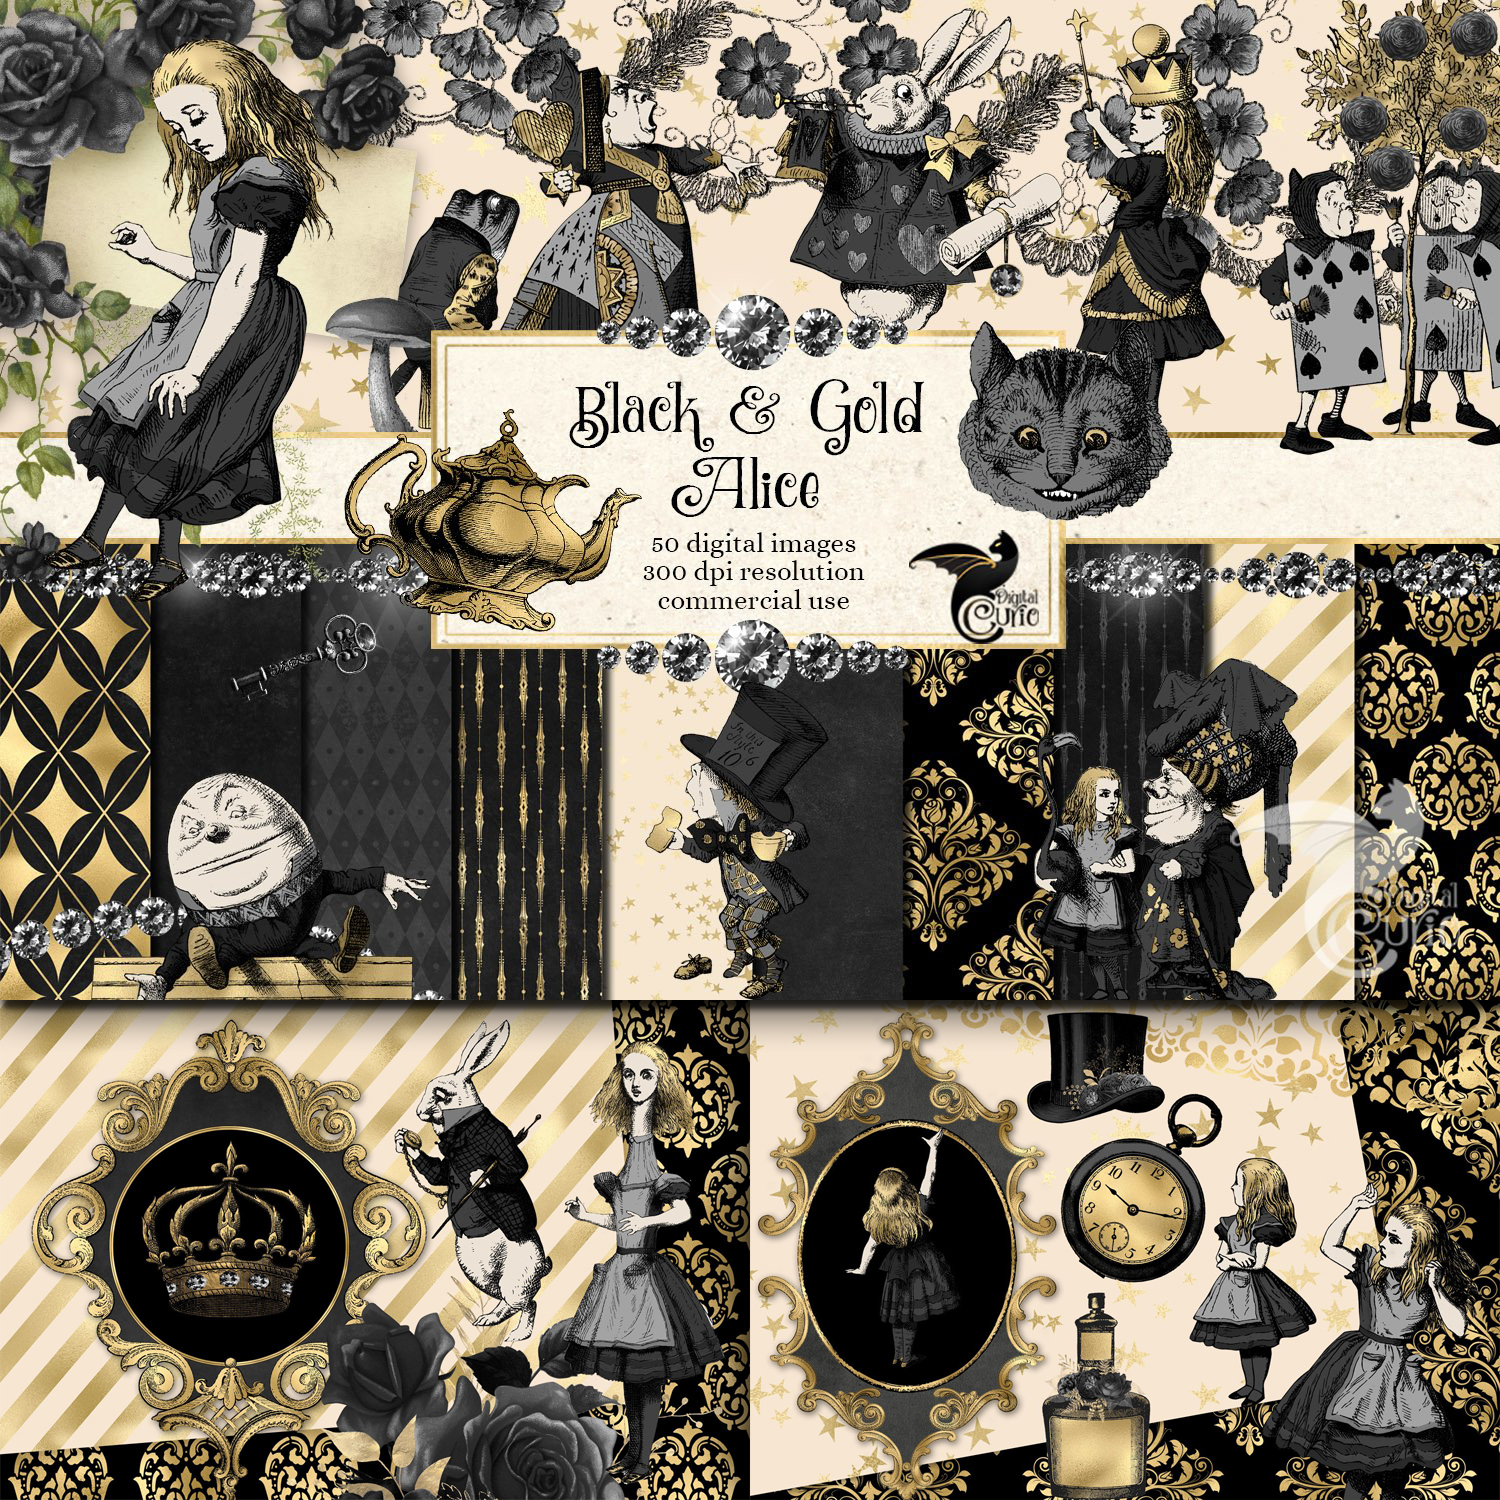 Prints of black and gold alice in wonderland graphics.